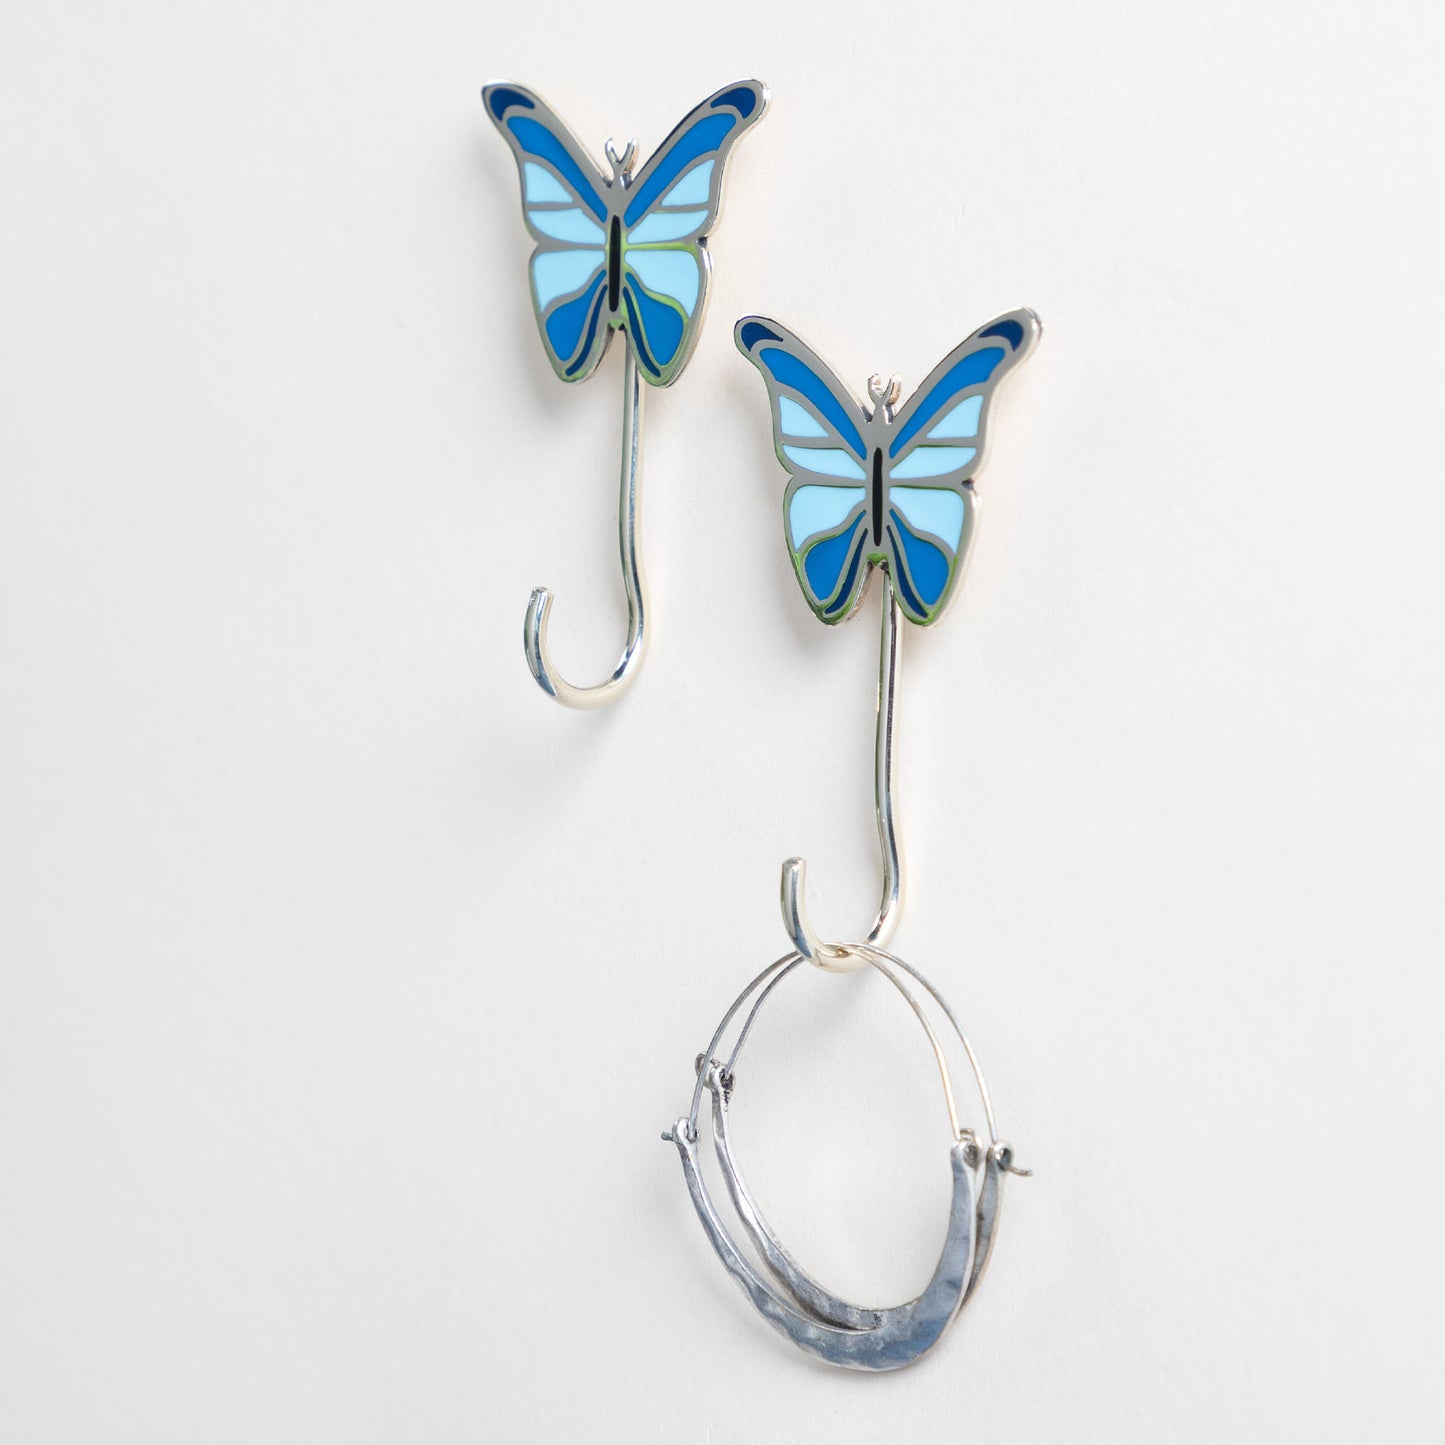 Pretty Butterfly Hand Painted Wall Hook - Set of 2